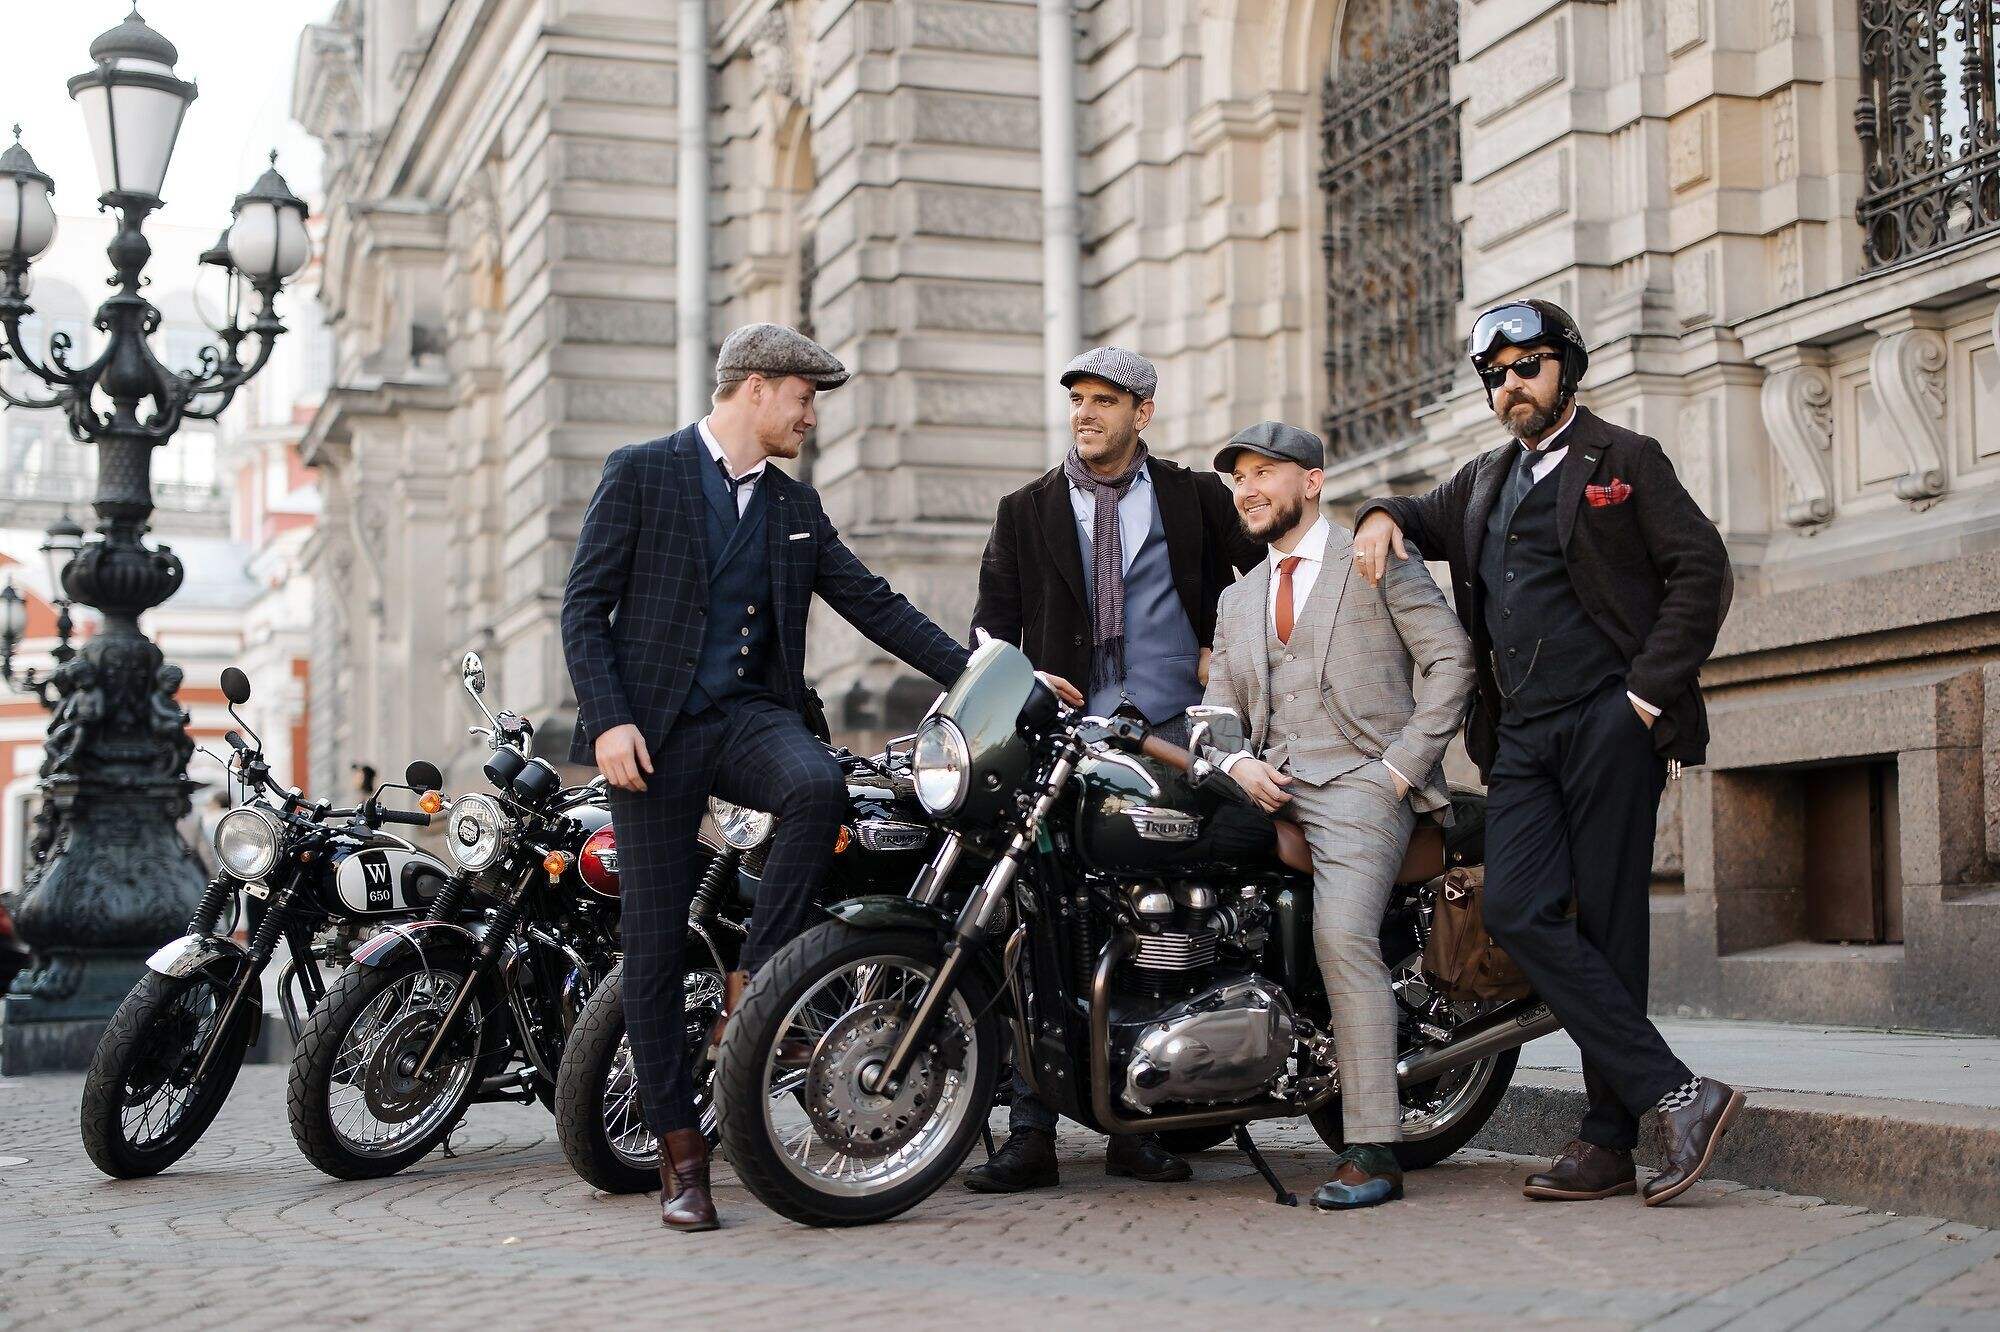 20 Facts About Distinguished Gentleman's Ride - Facts.net